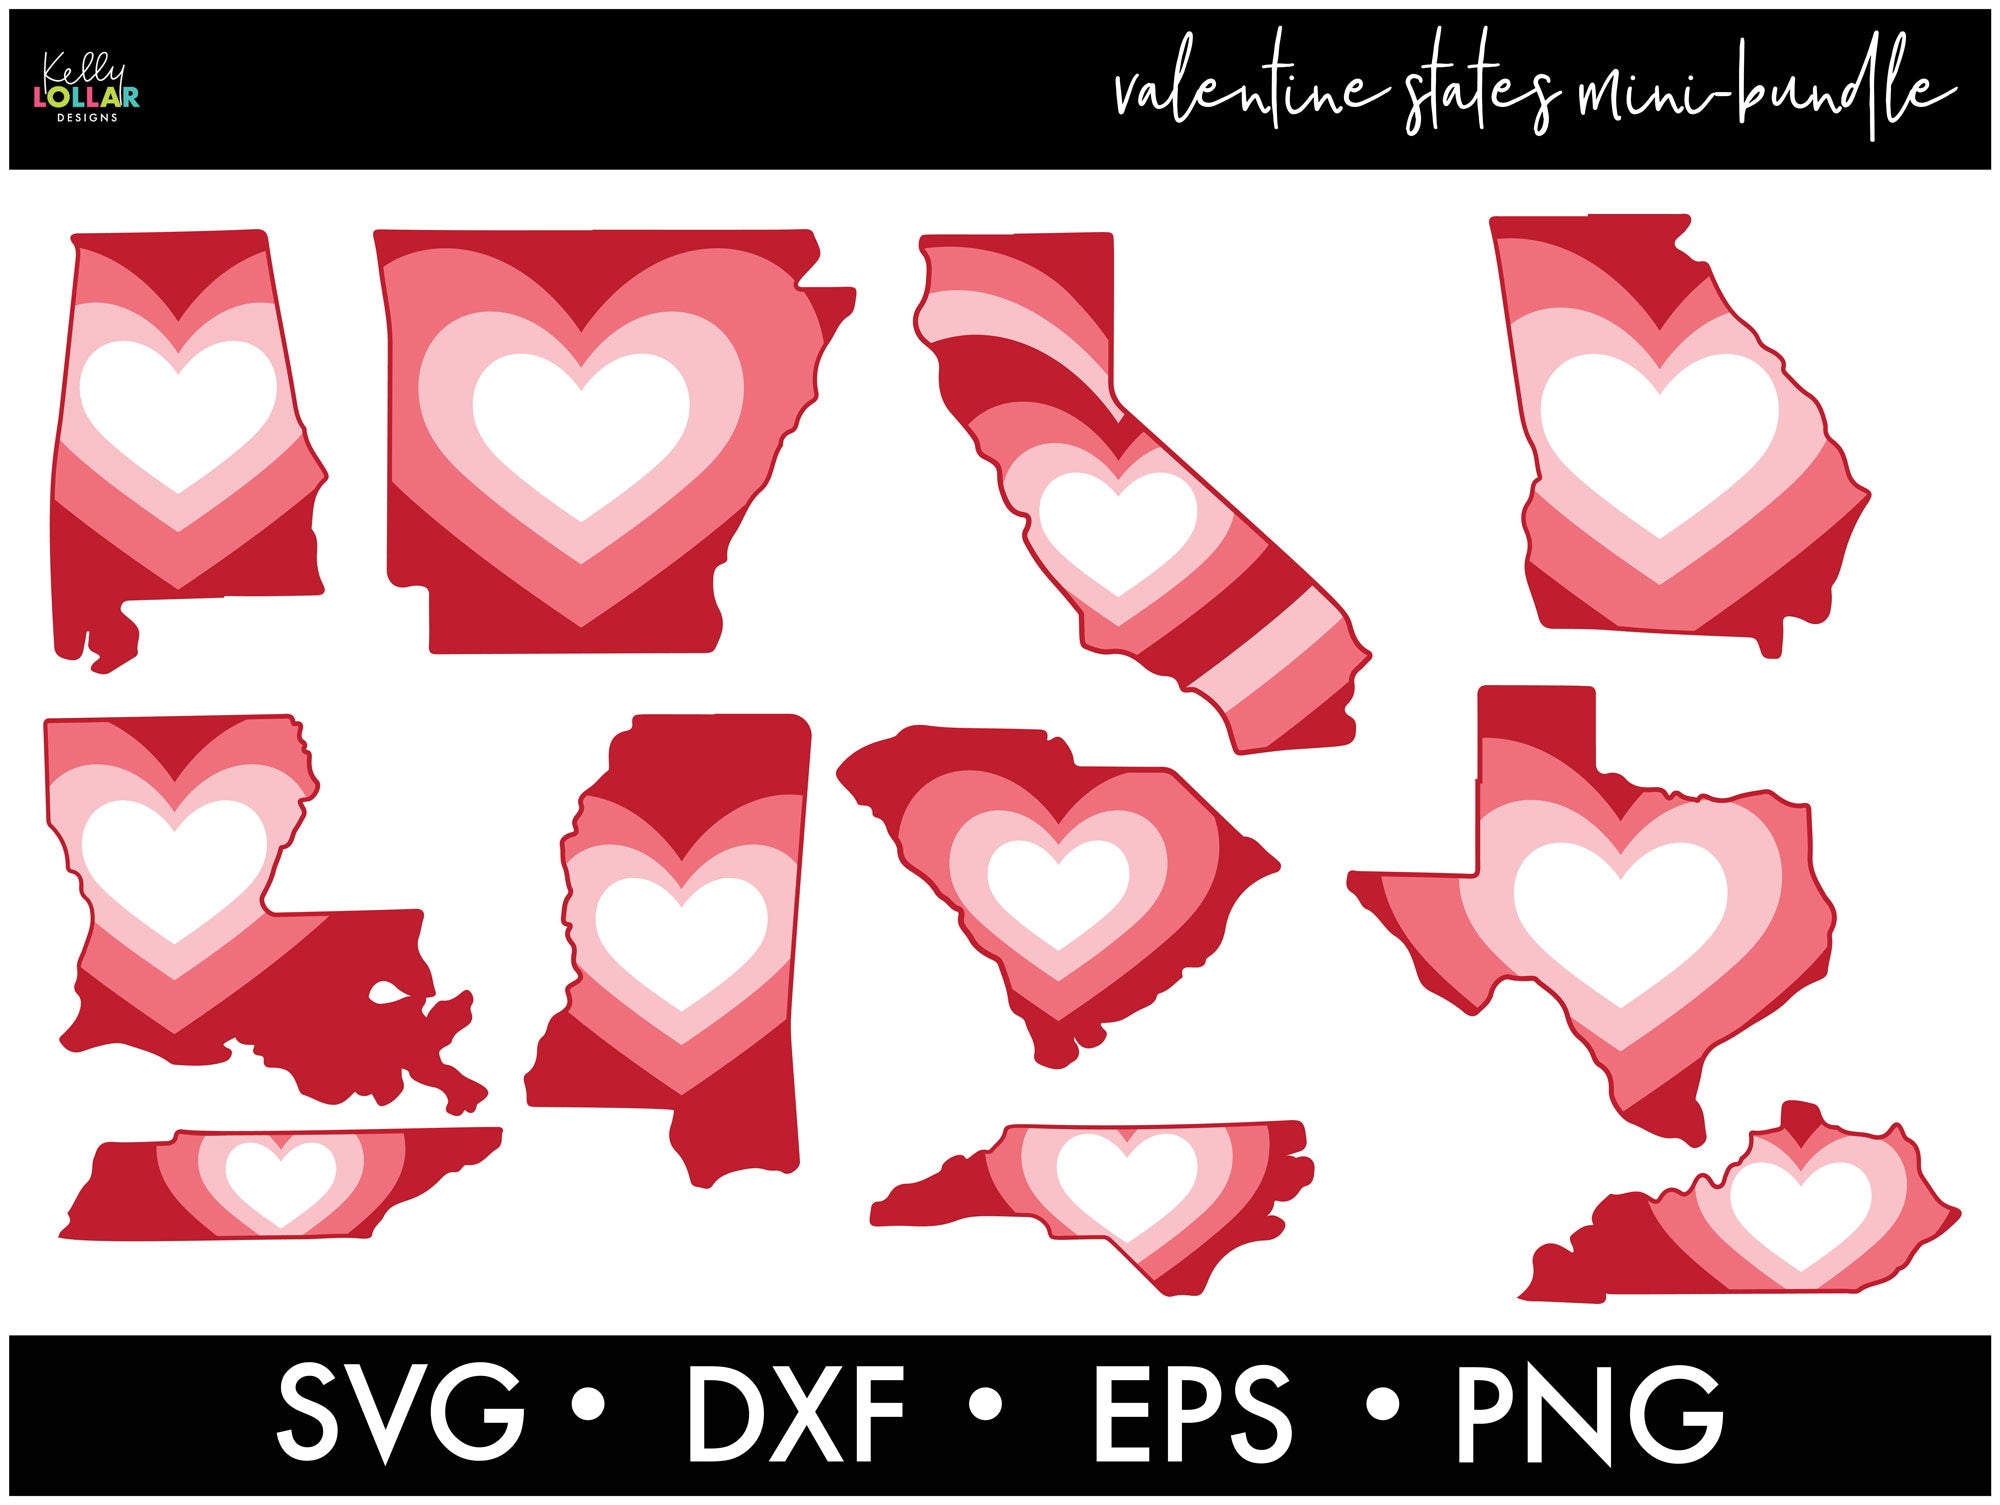 Wisconsin State Bundle  SVG DXF EPS PNG Cut Files - Kelly Lollar